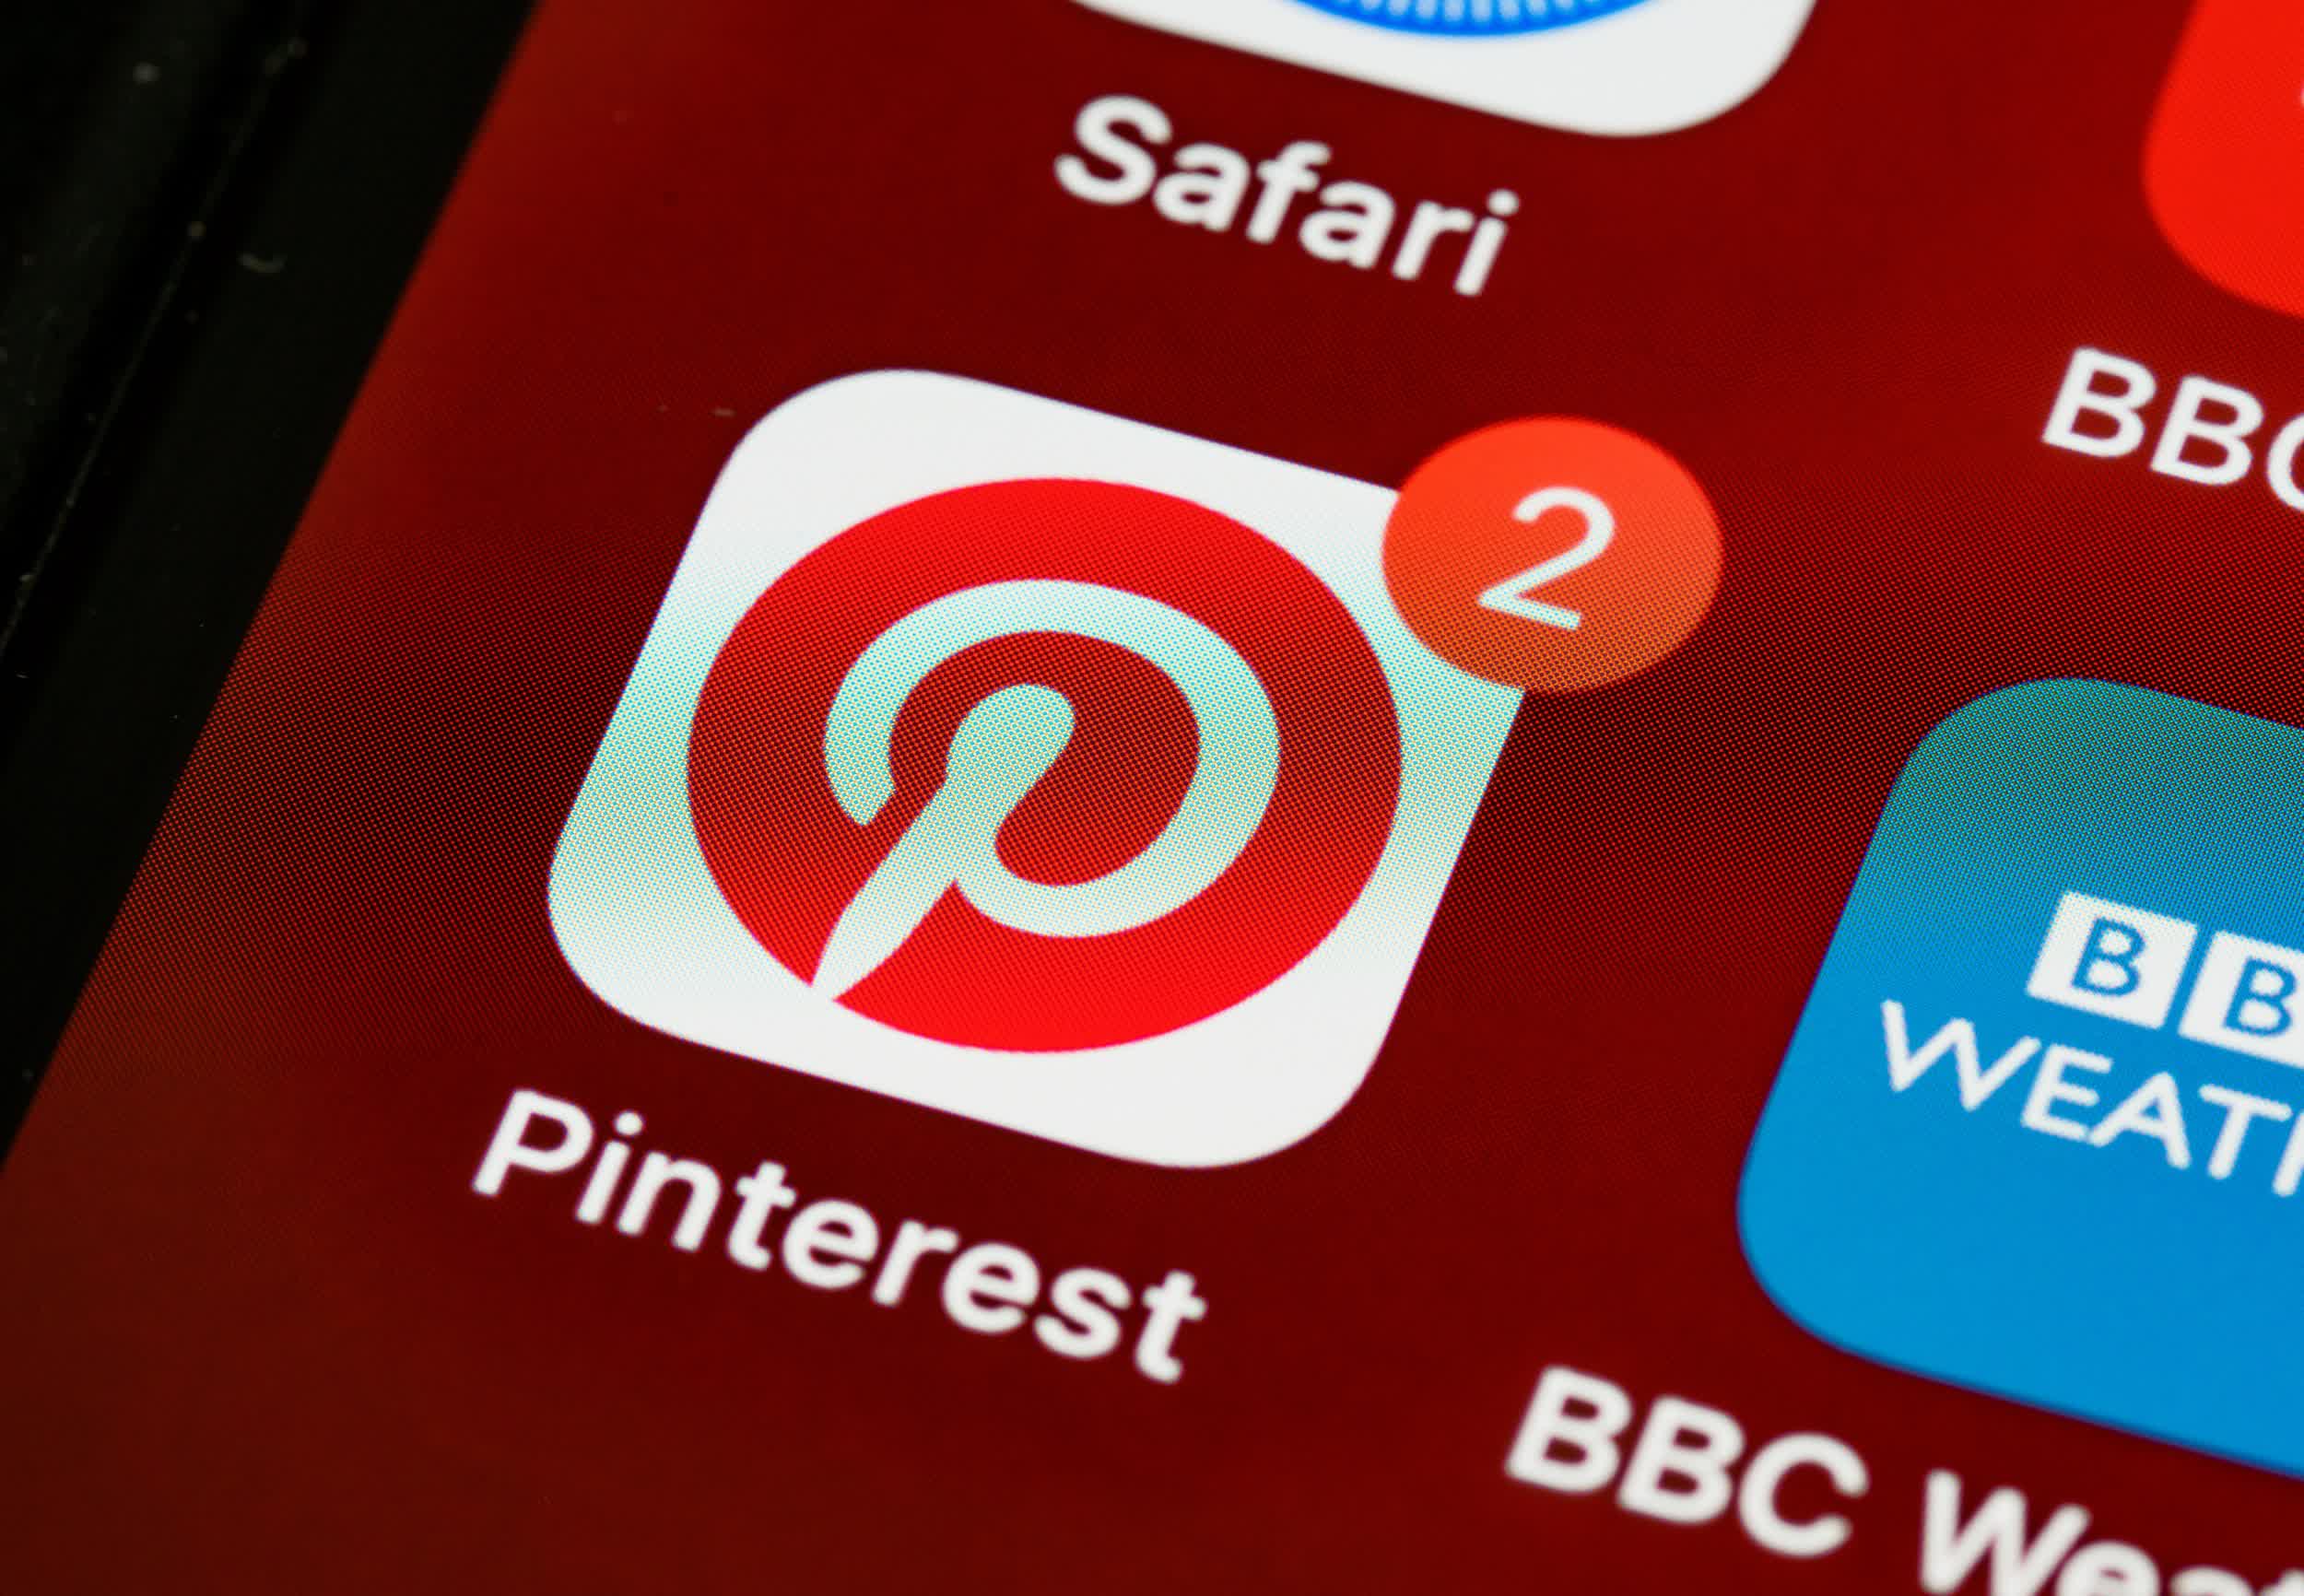 PayPal may be interested in buying Pinterest for $45 billion